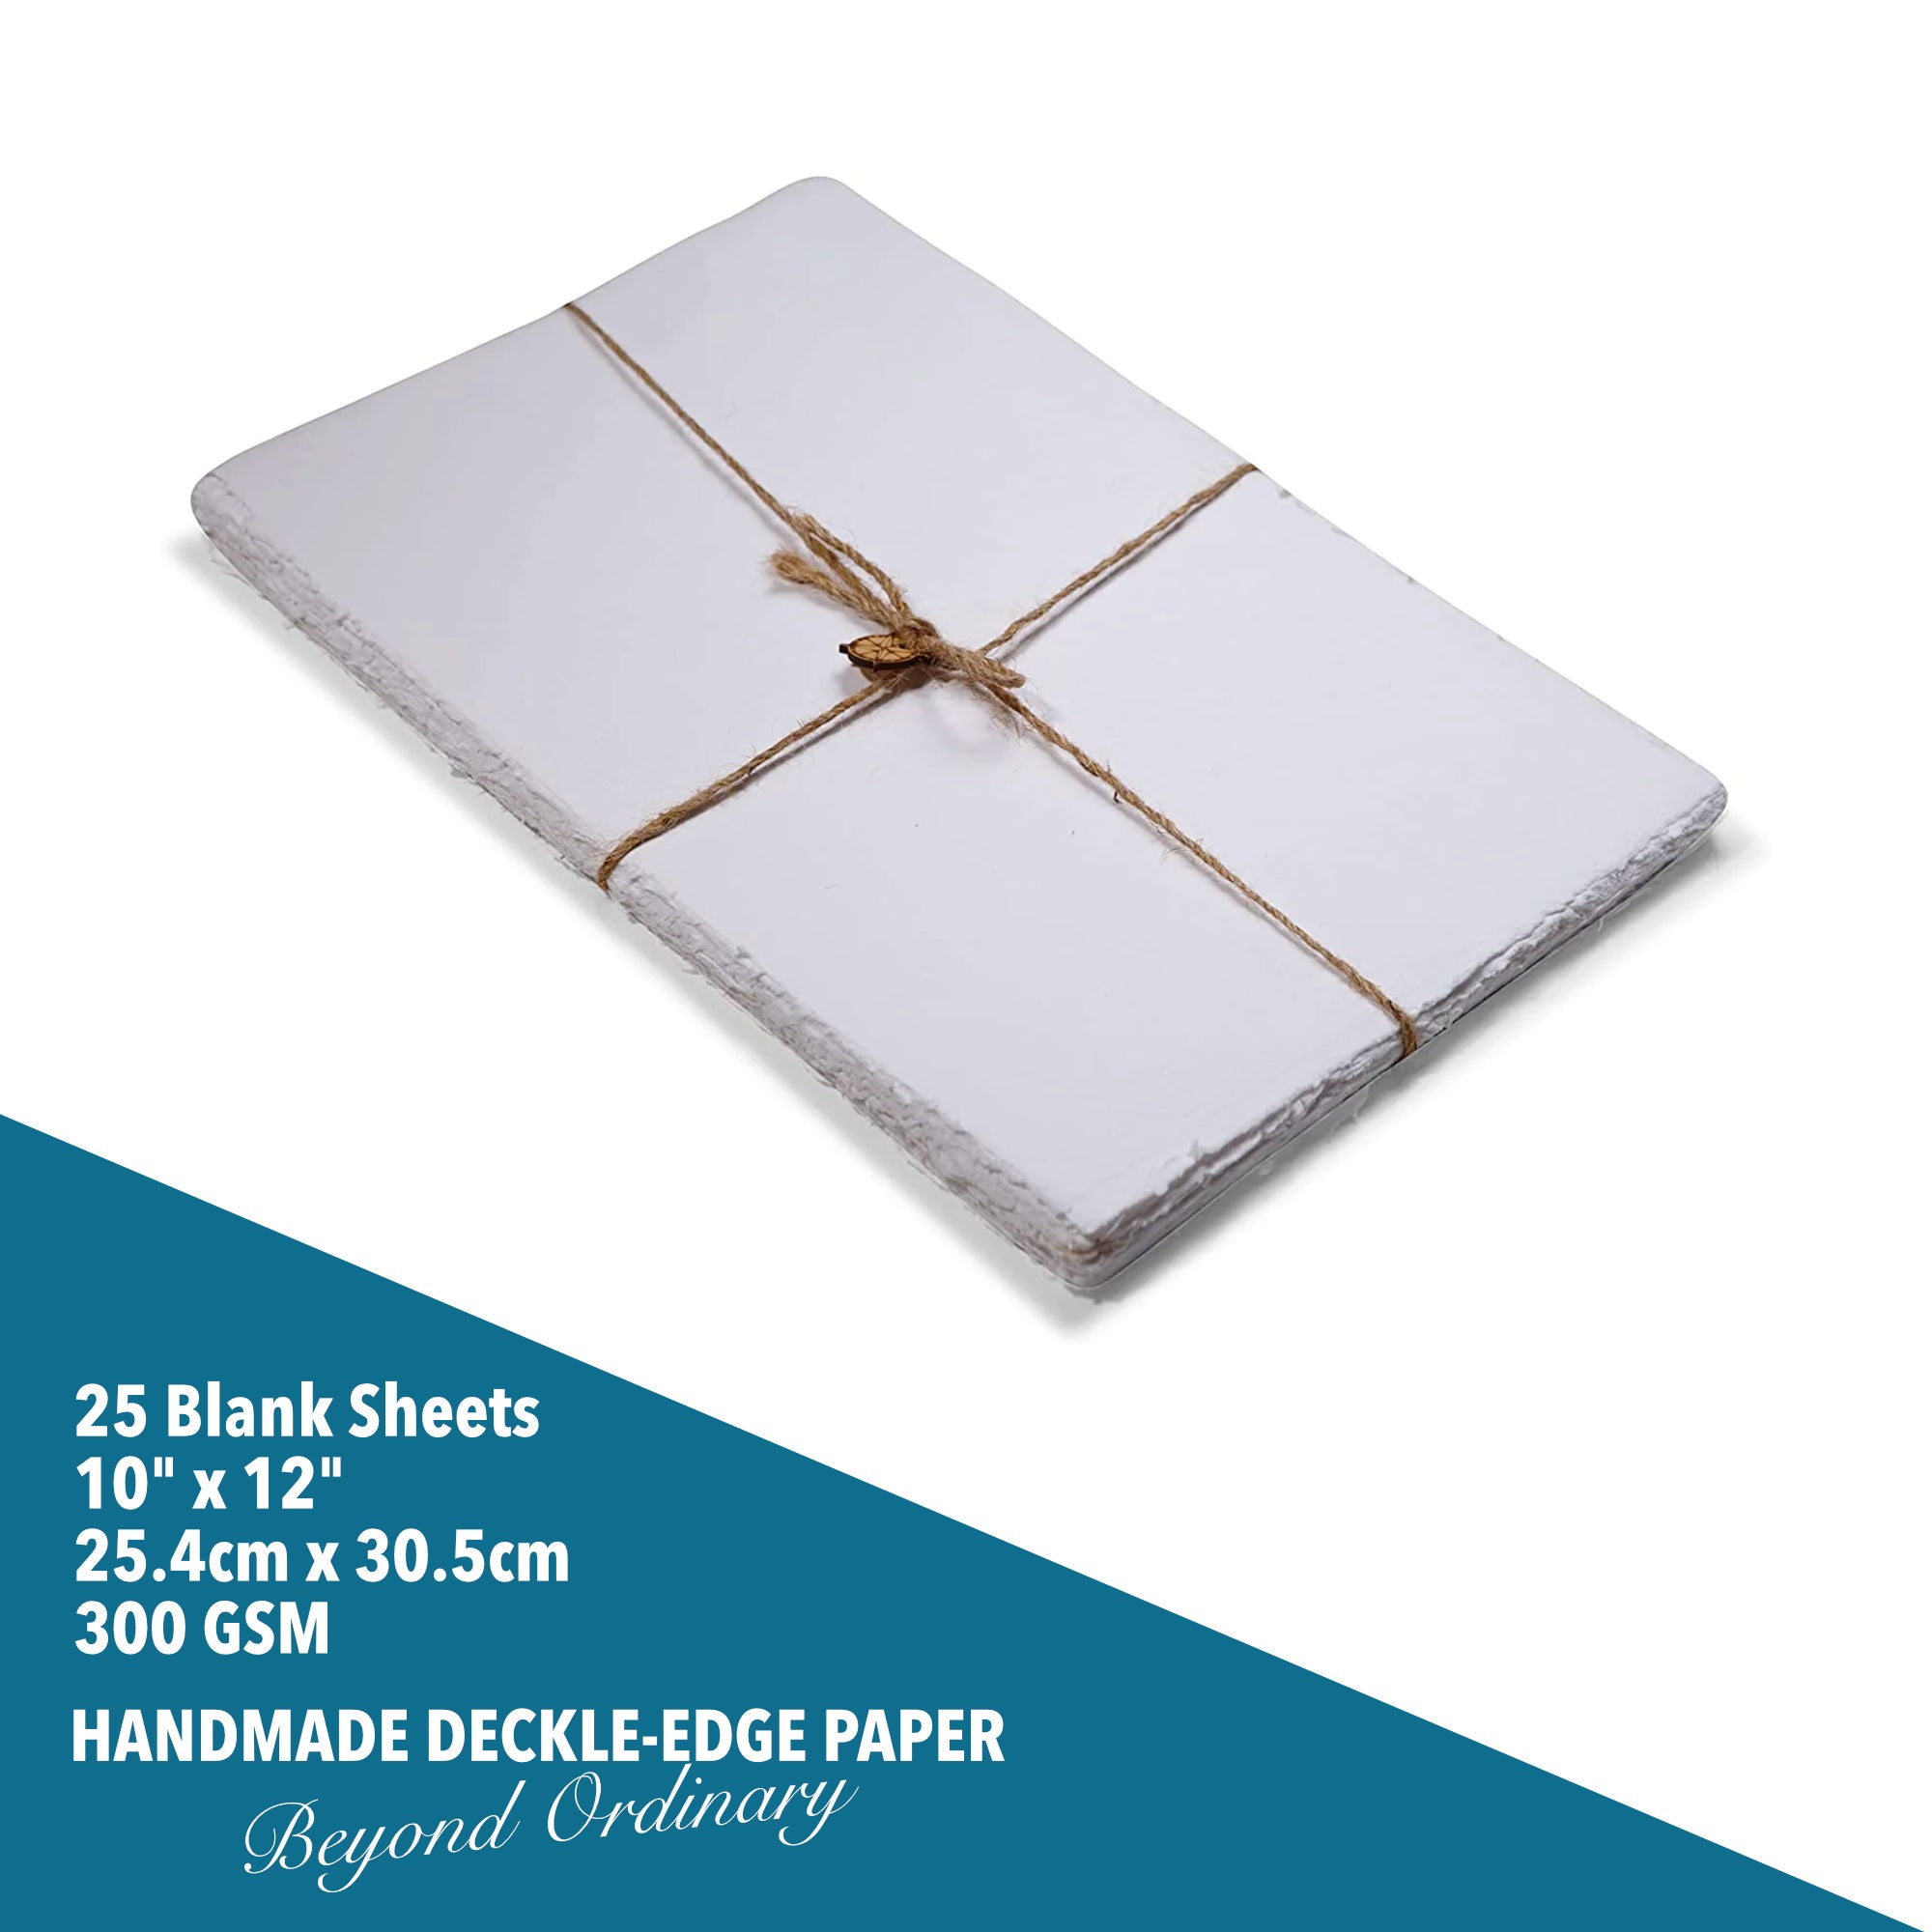 Handmade paper sheets all size deckled edge 50 sheets acid free paper 6 X 8